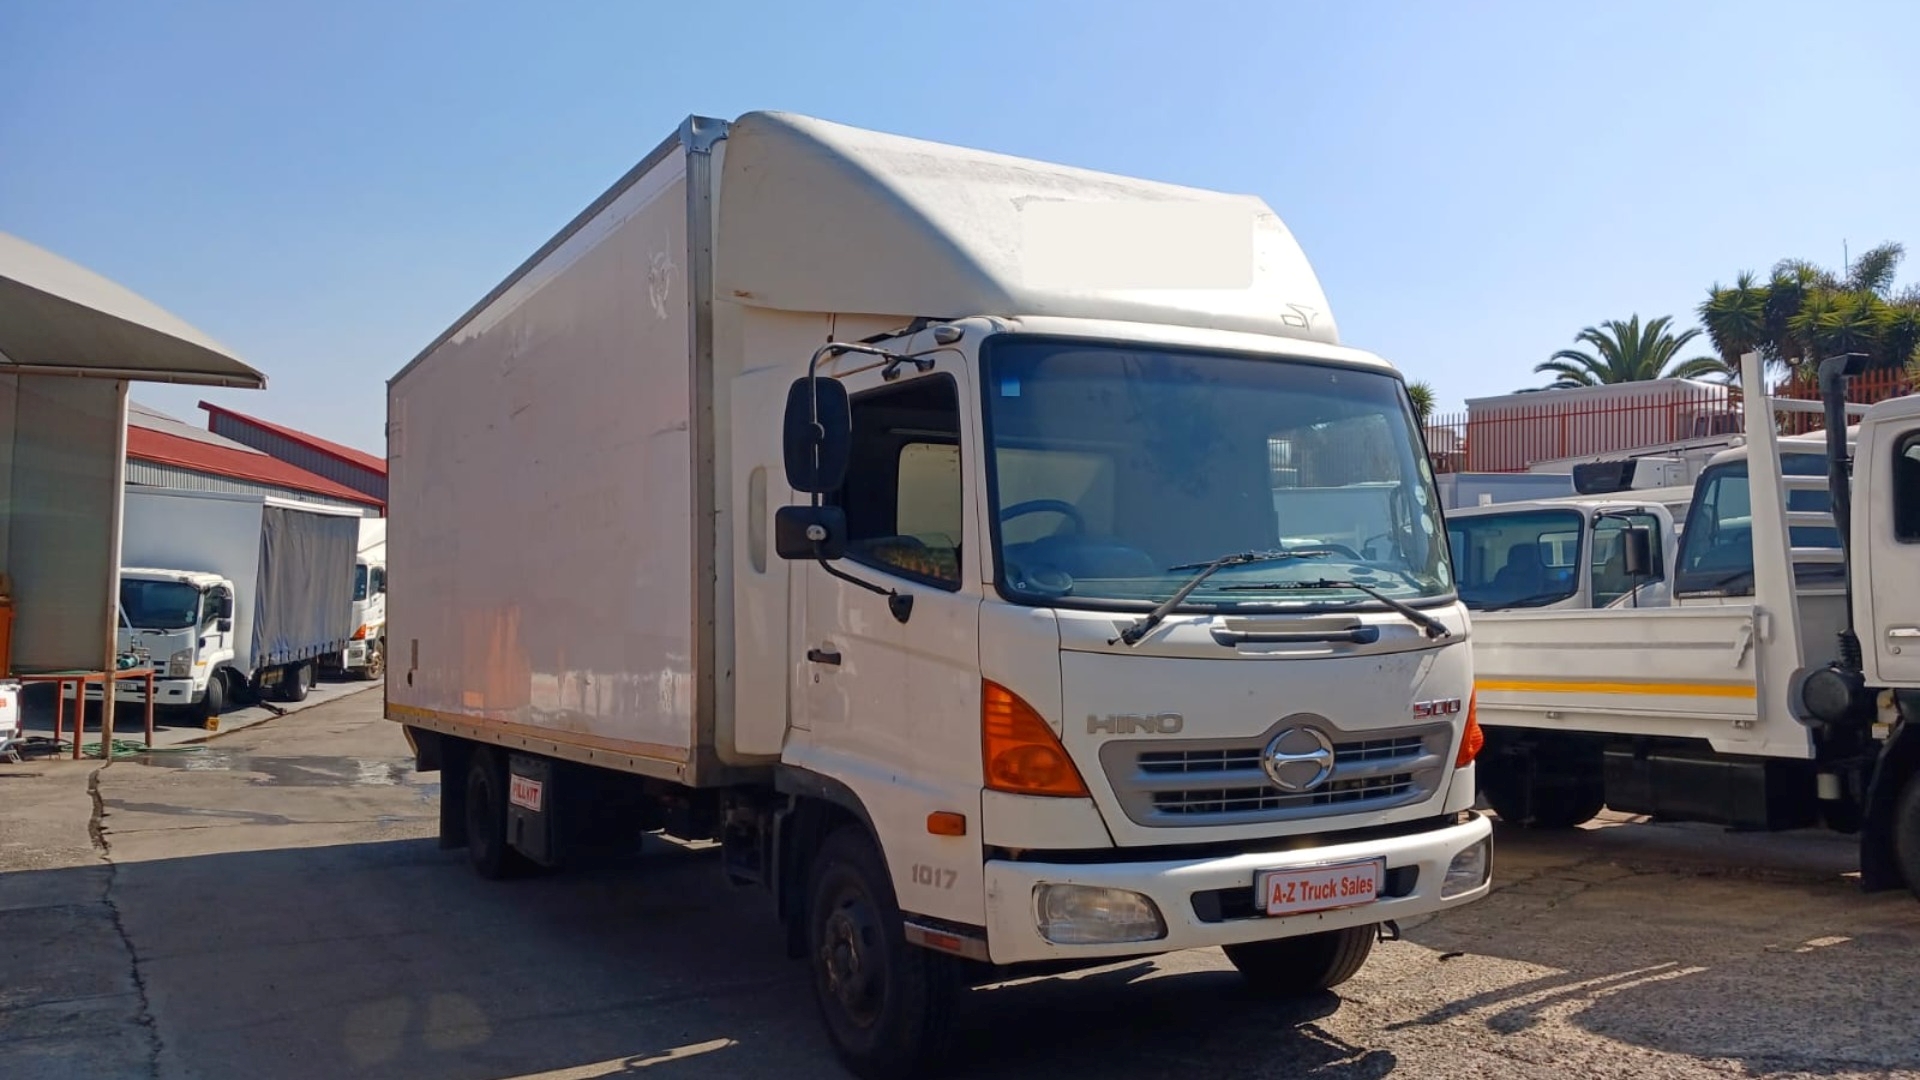 Hino Box trucks 1017 6TON 2014 for sale by A to Z TRUCK SALES | Truck & Trailer Marketplace